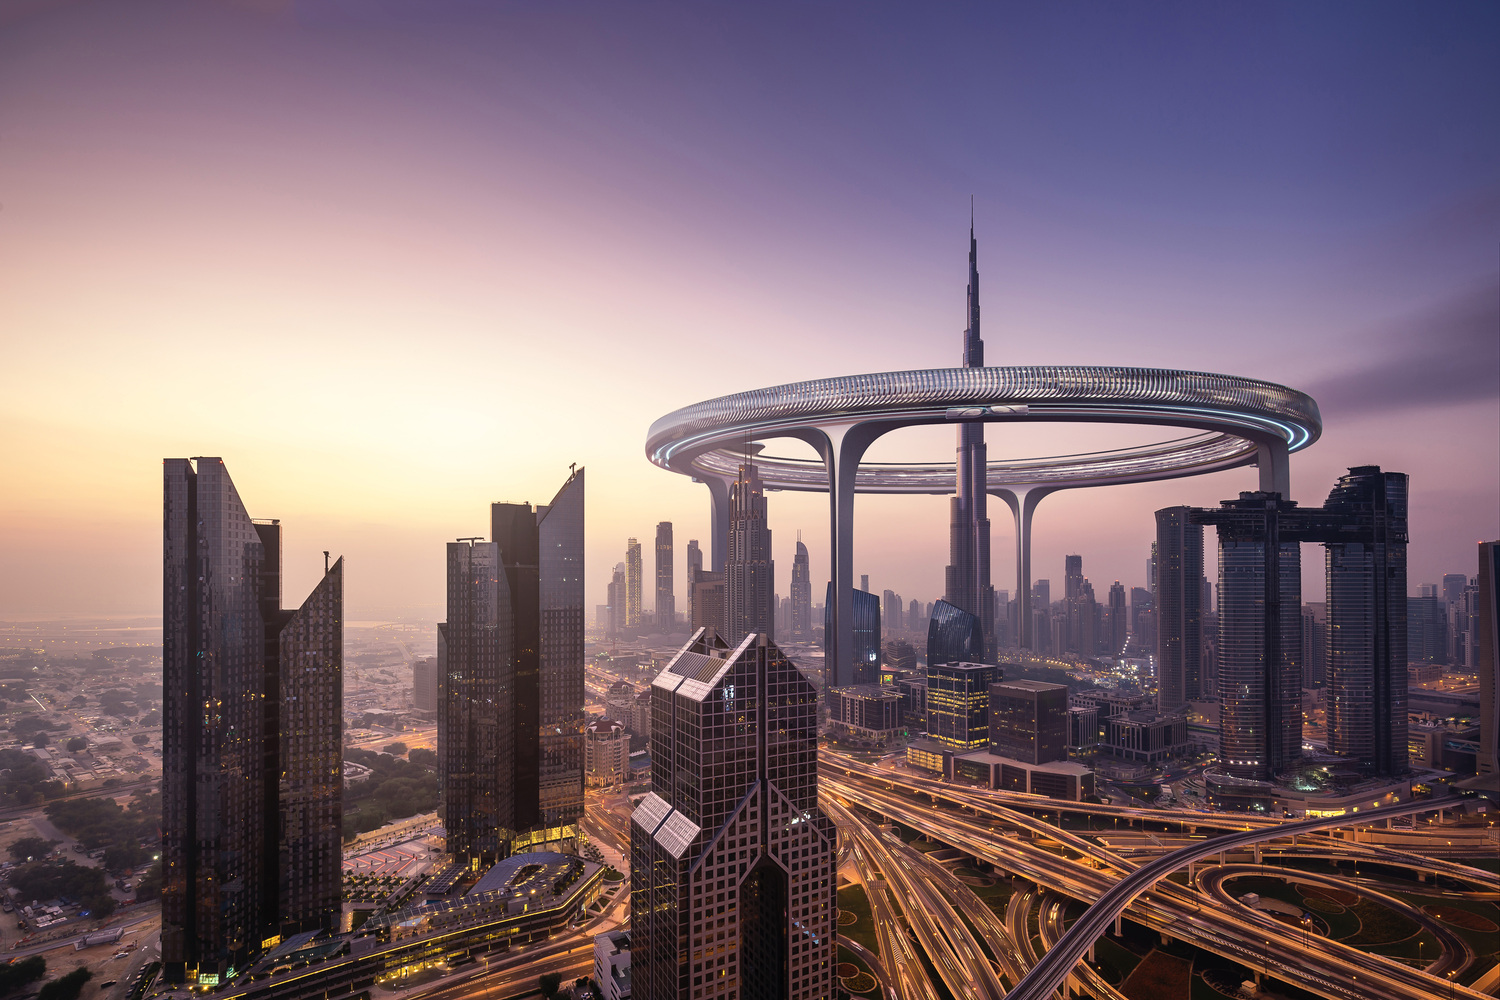 Downtown Circle - A Giant Ring-Like Structure Is Proposed To Encircle Dubai's Burj Khalifa